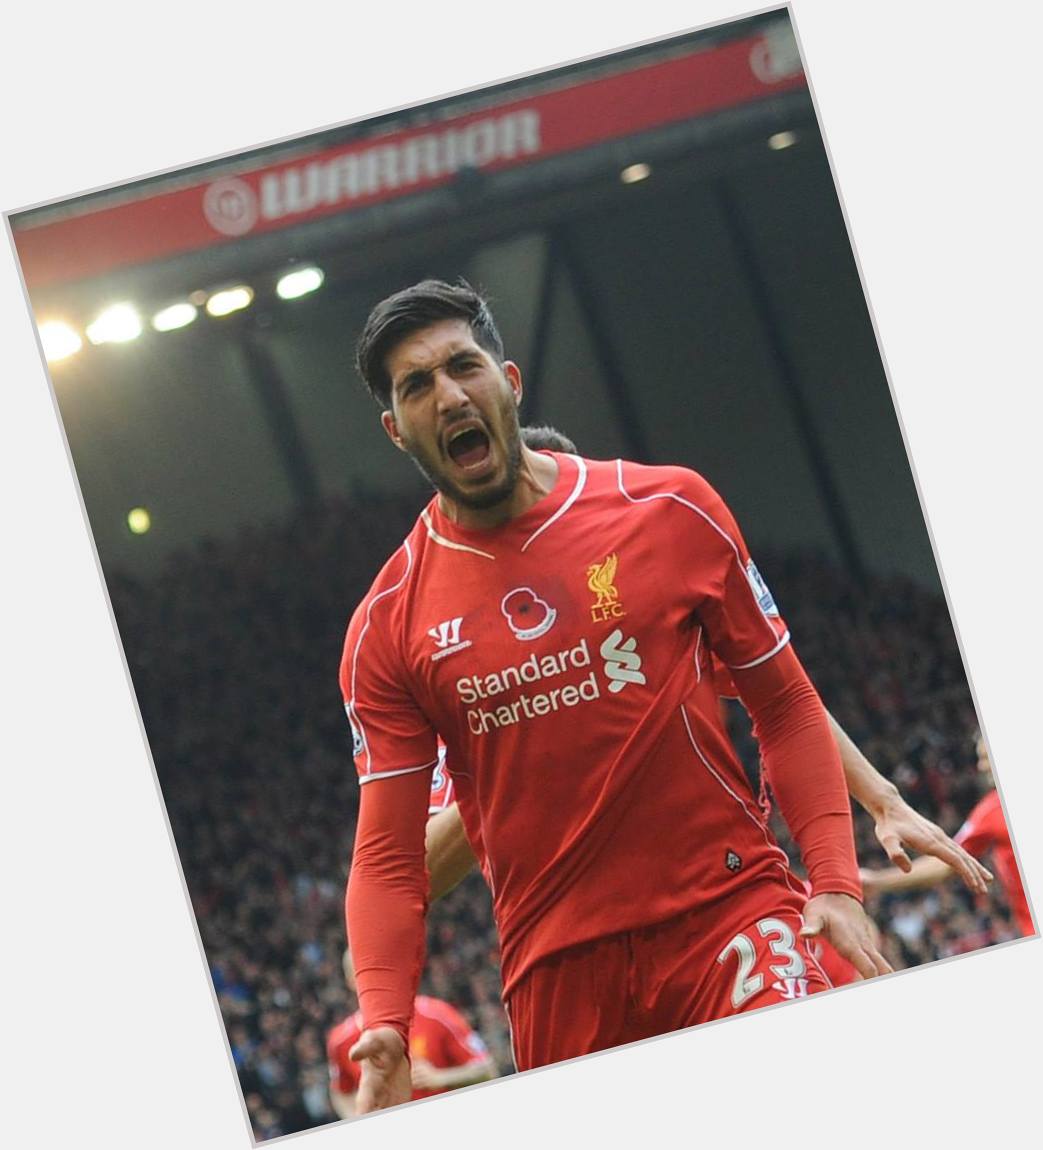 Happy birthday emre can may Allah bless you brother 